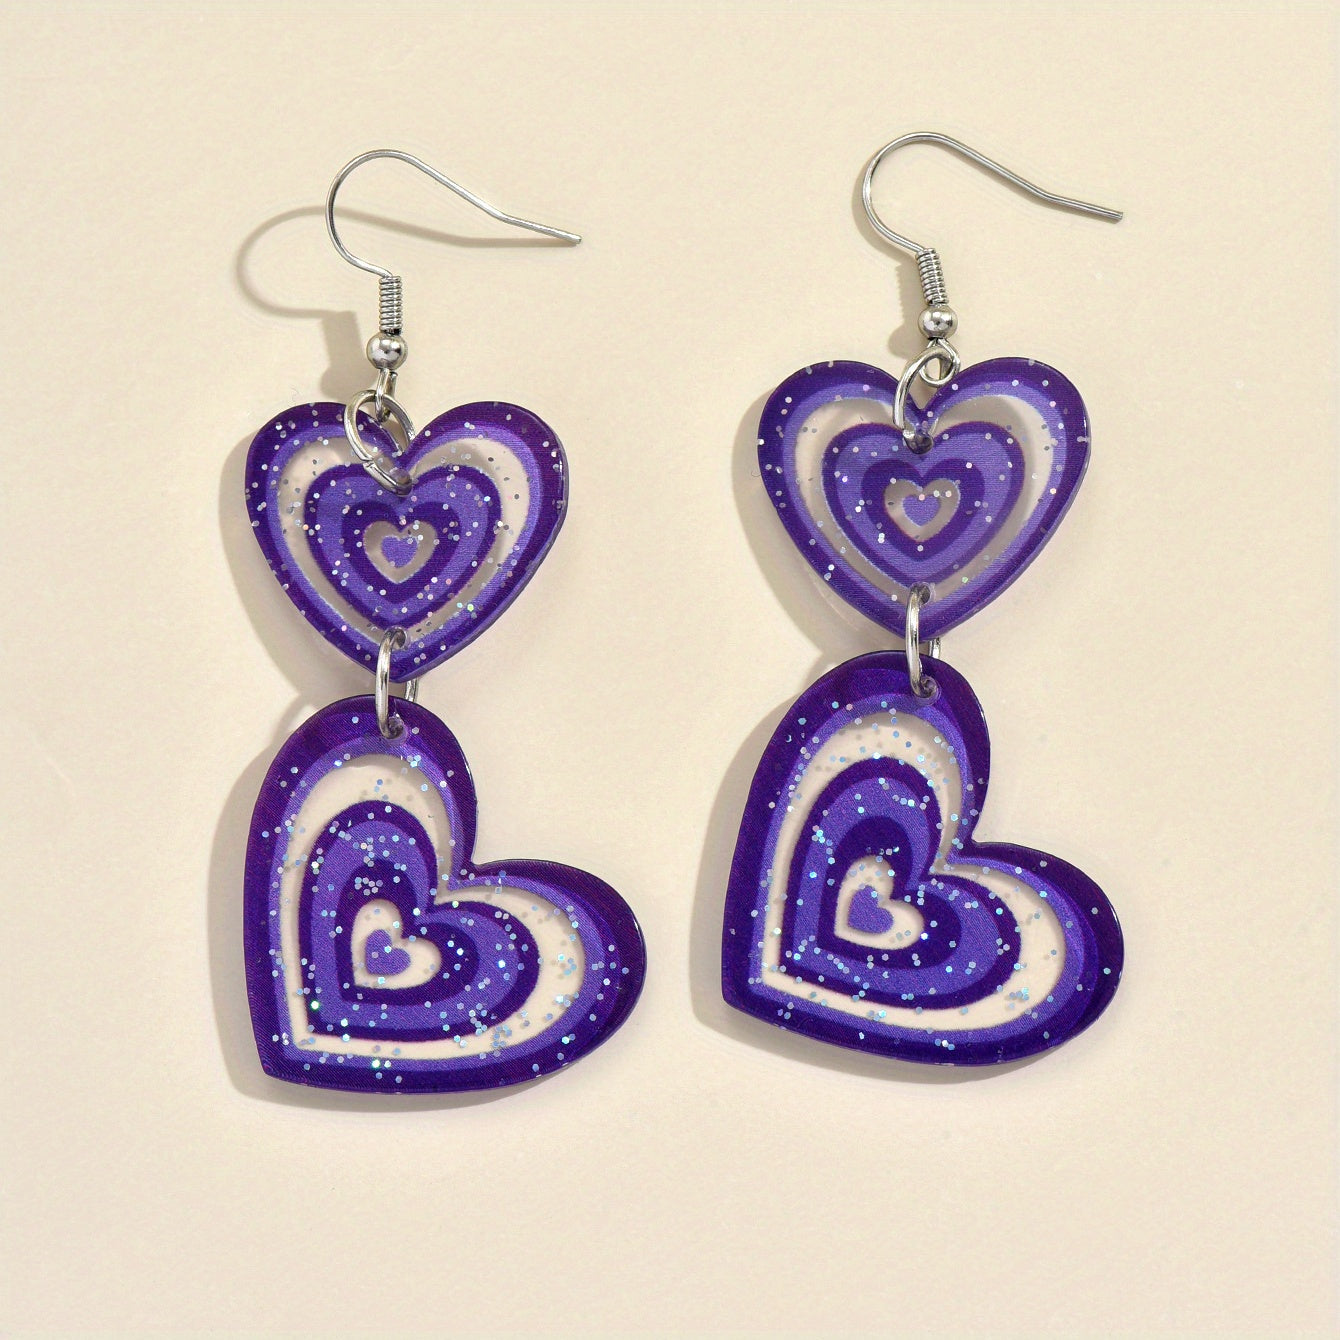 Add a Touch of Y2K Style to Your Look with Lovely Heart Shaped Drop Dangle Earrings - Available in Two Sparkling Colors!